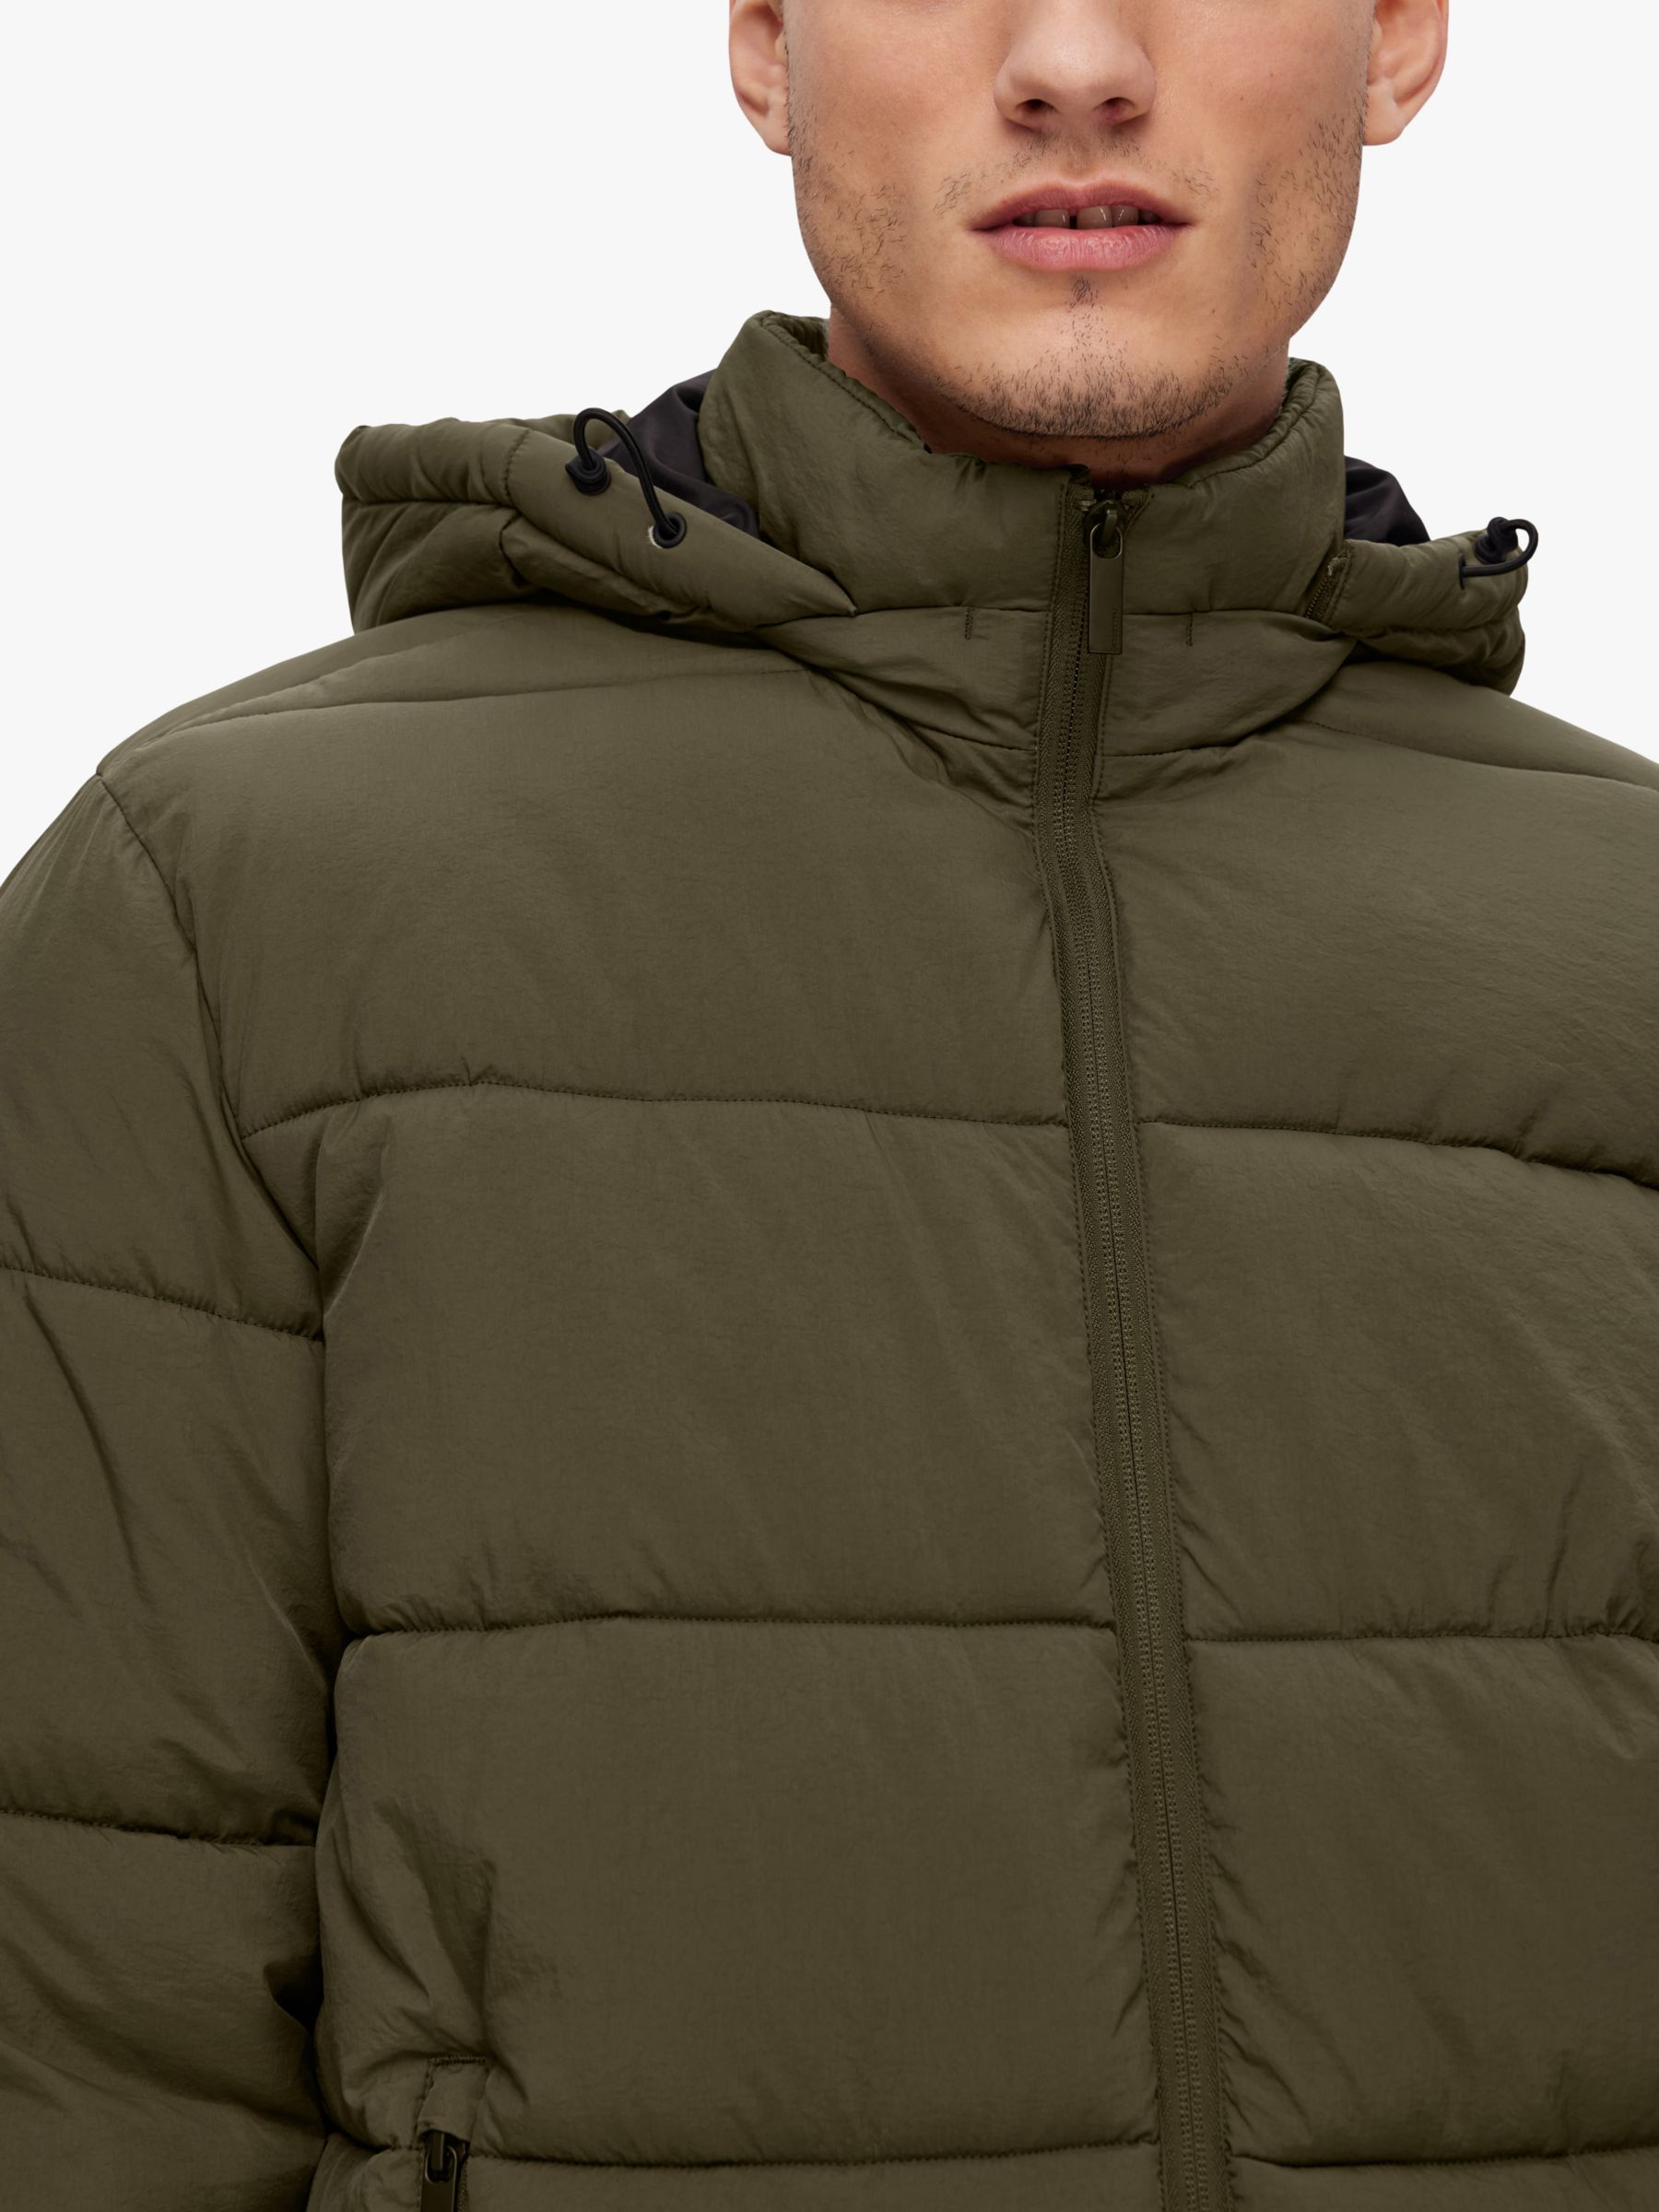 SELECTED HOMME Winter Jacket, Green, XL